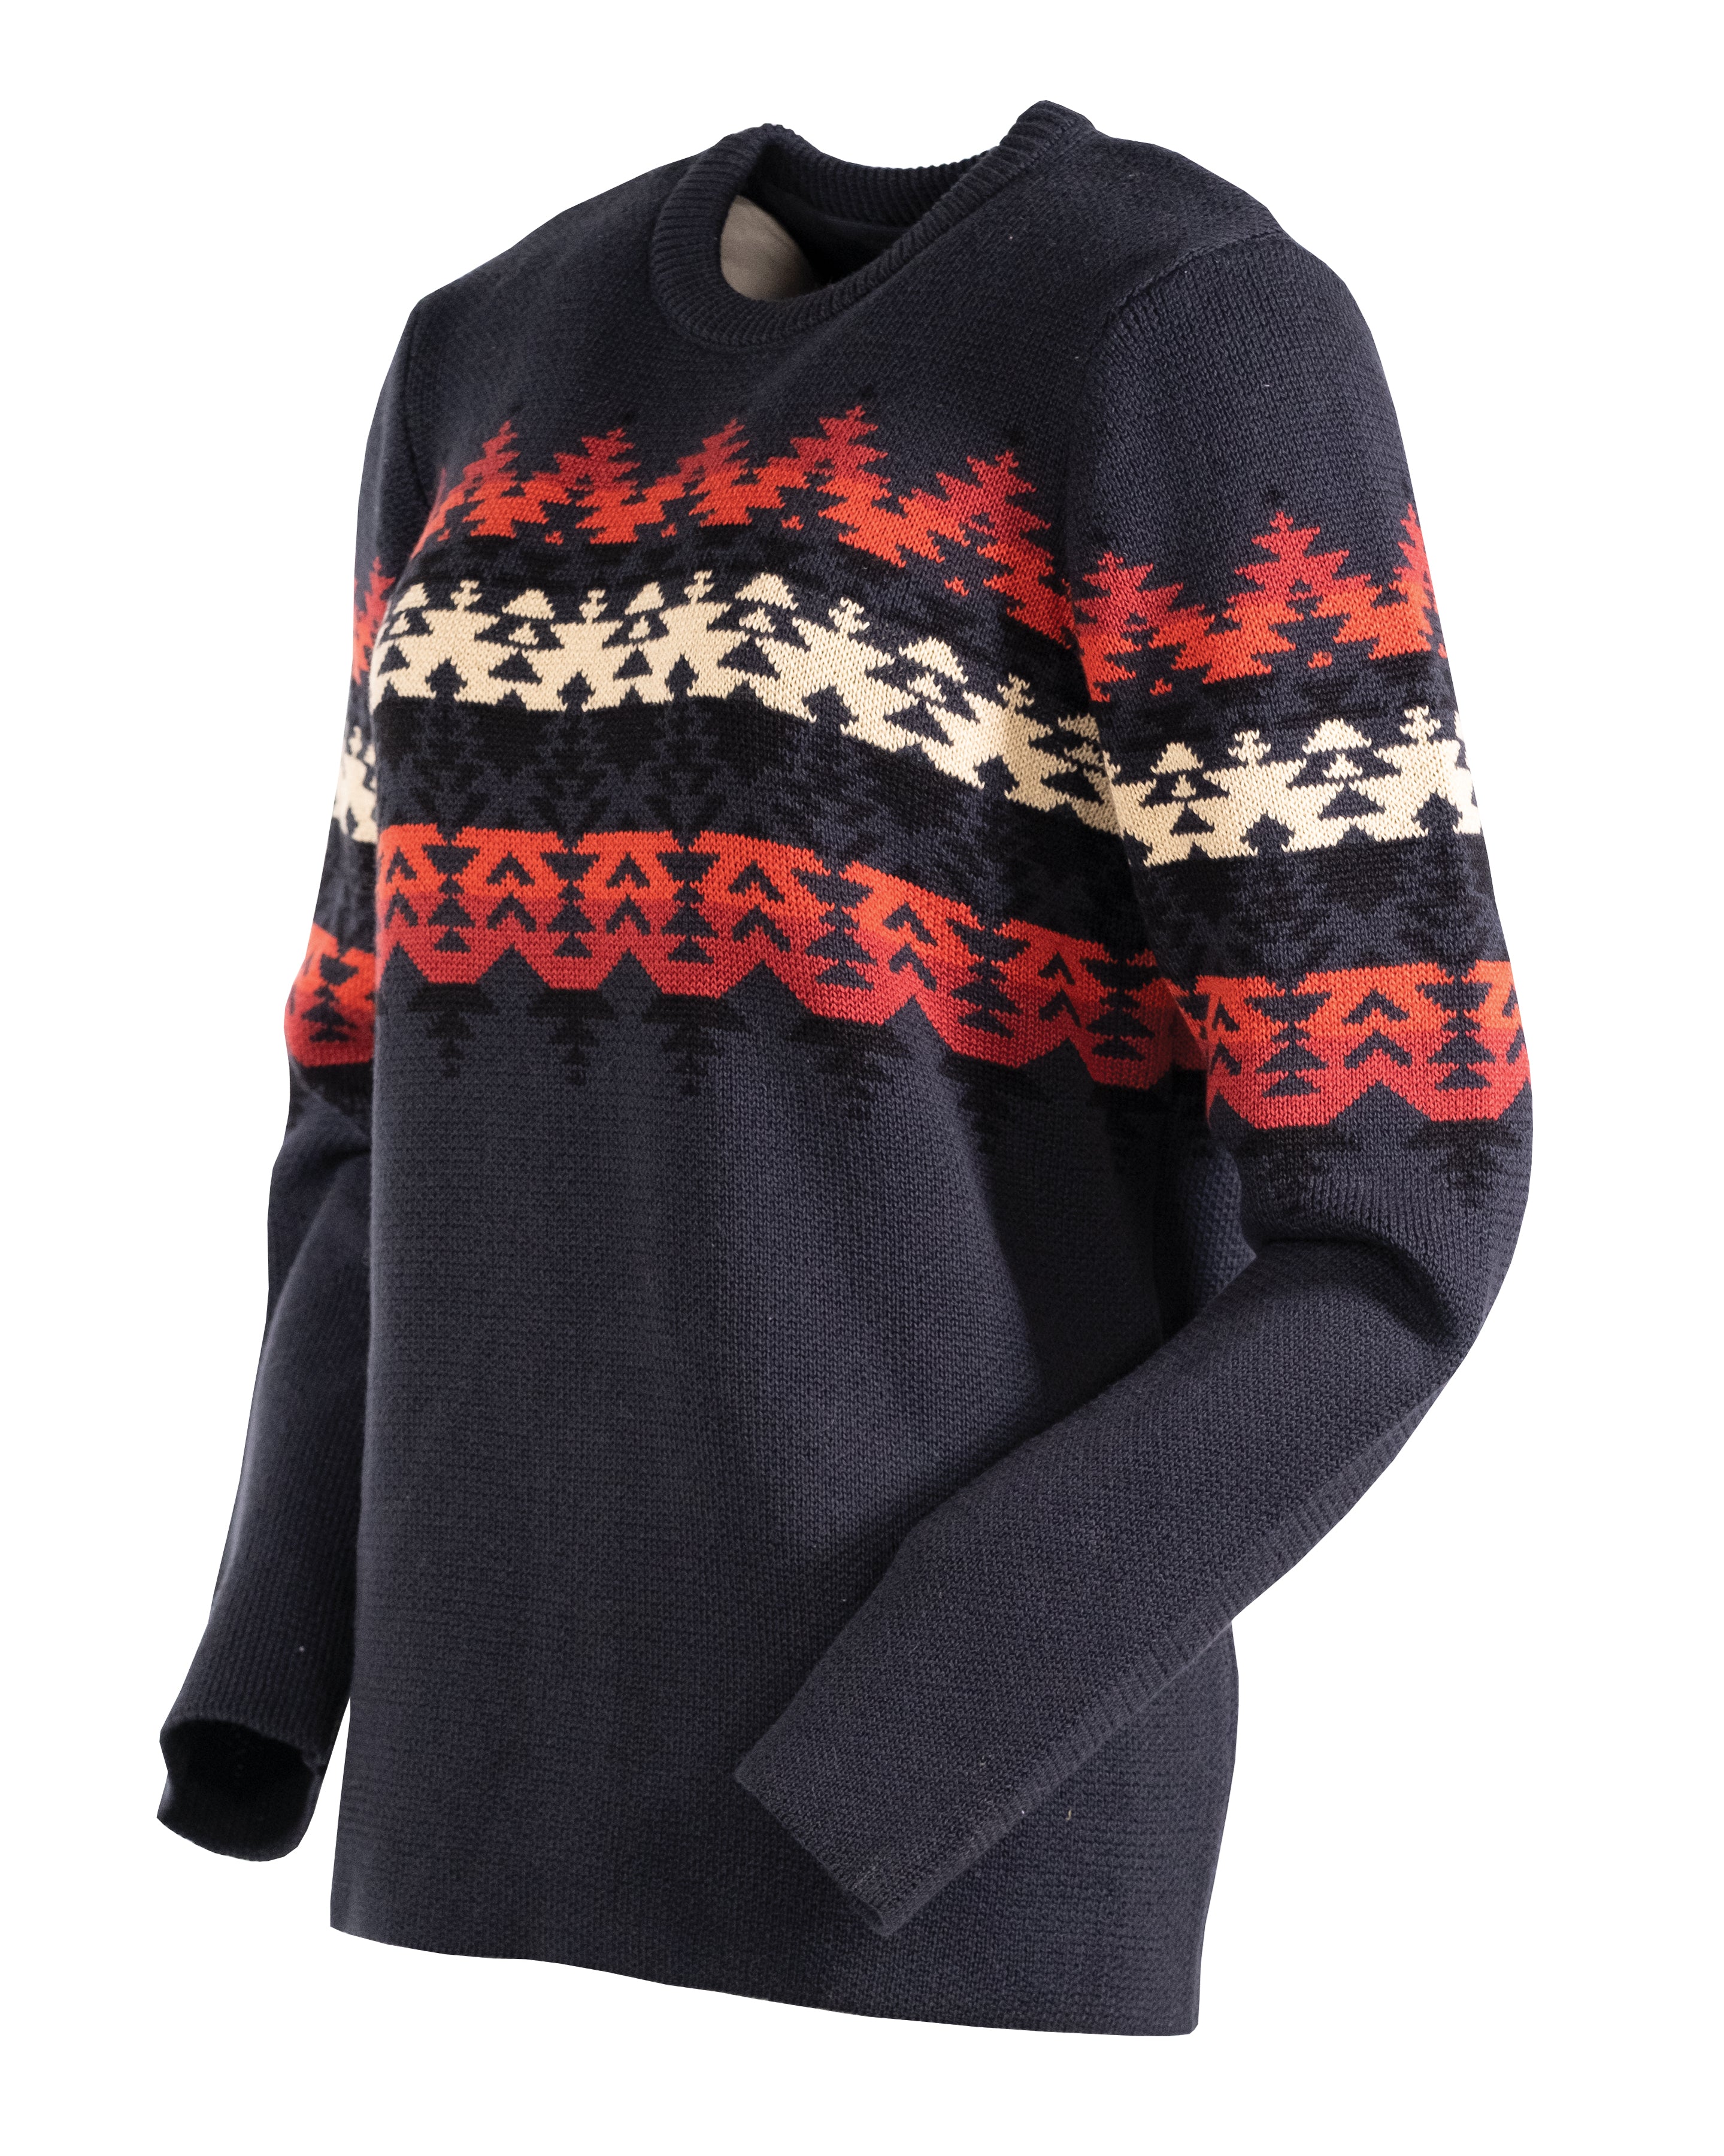 Outback Traders Amelia Sweater